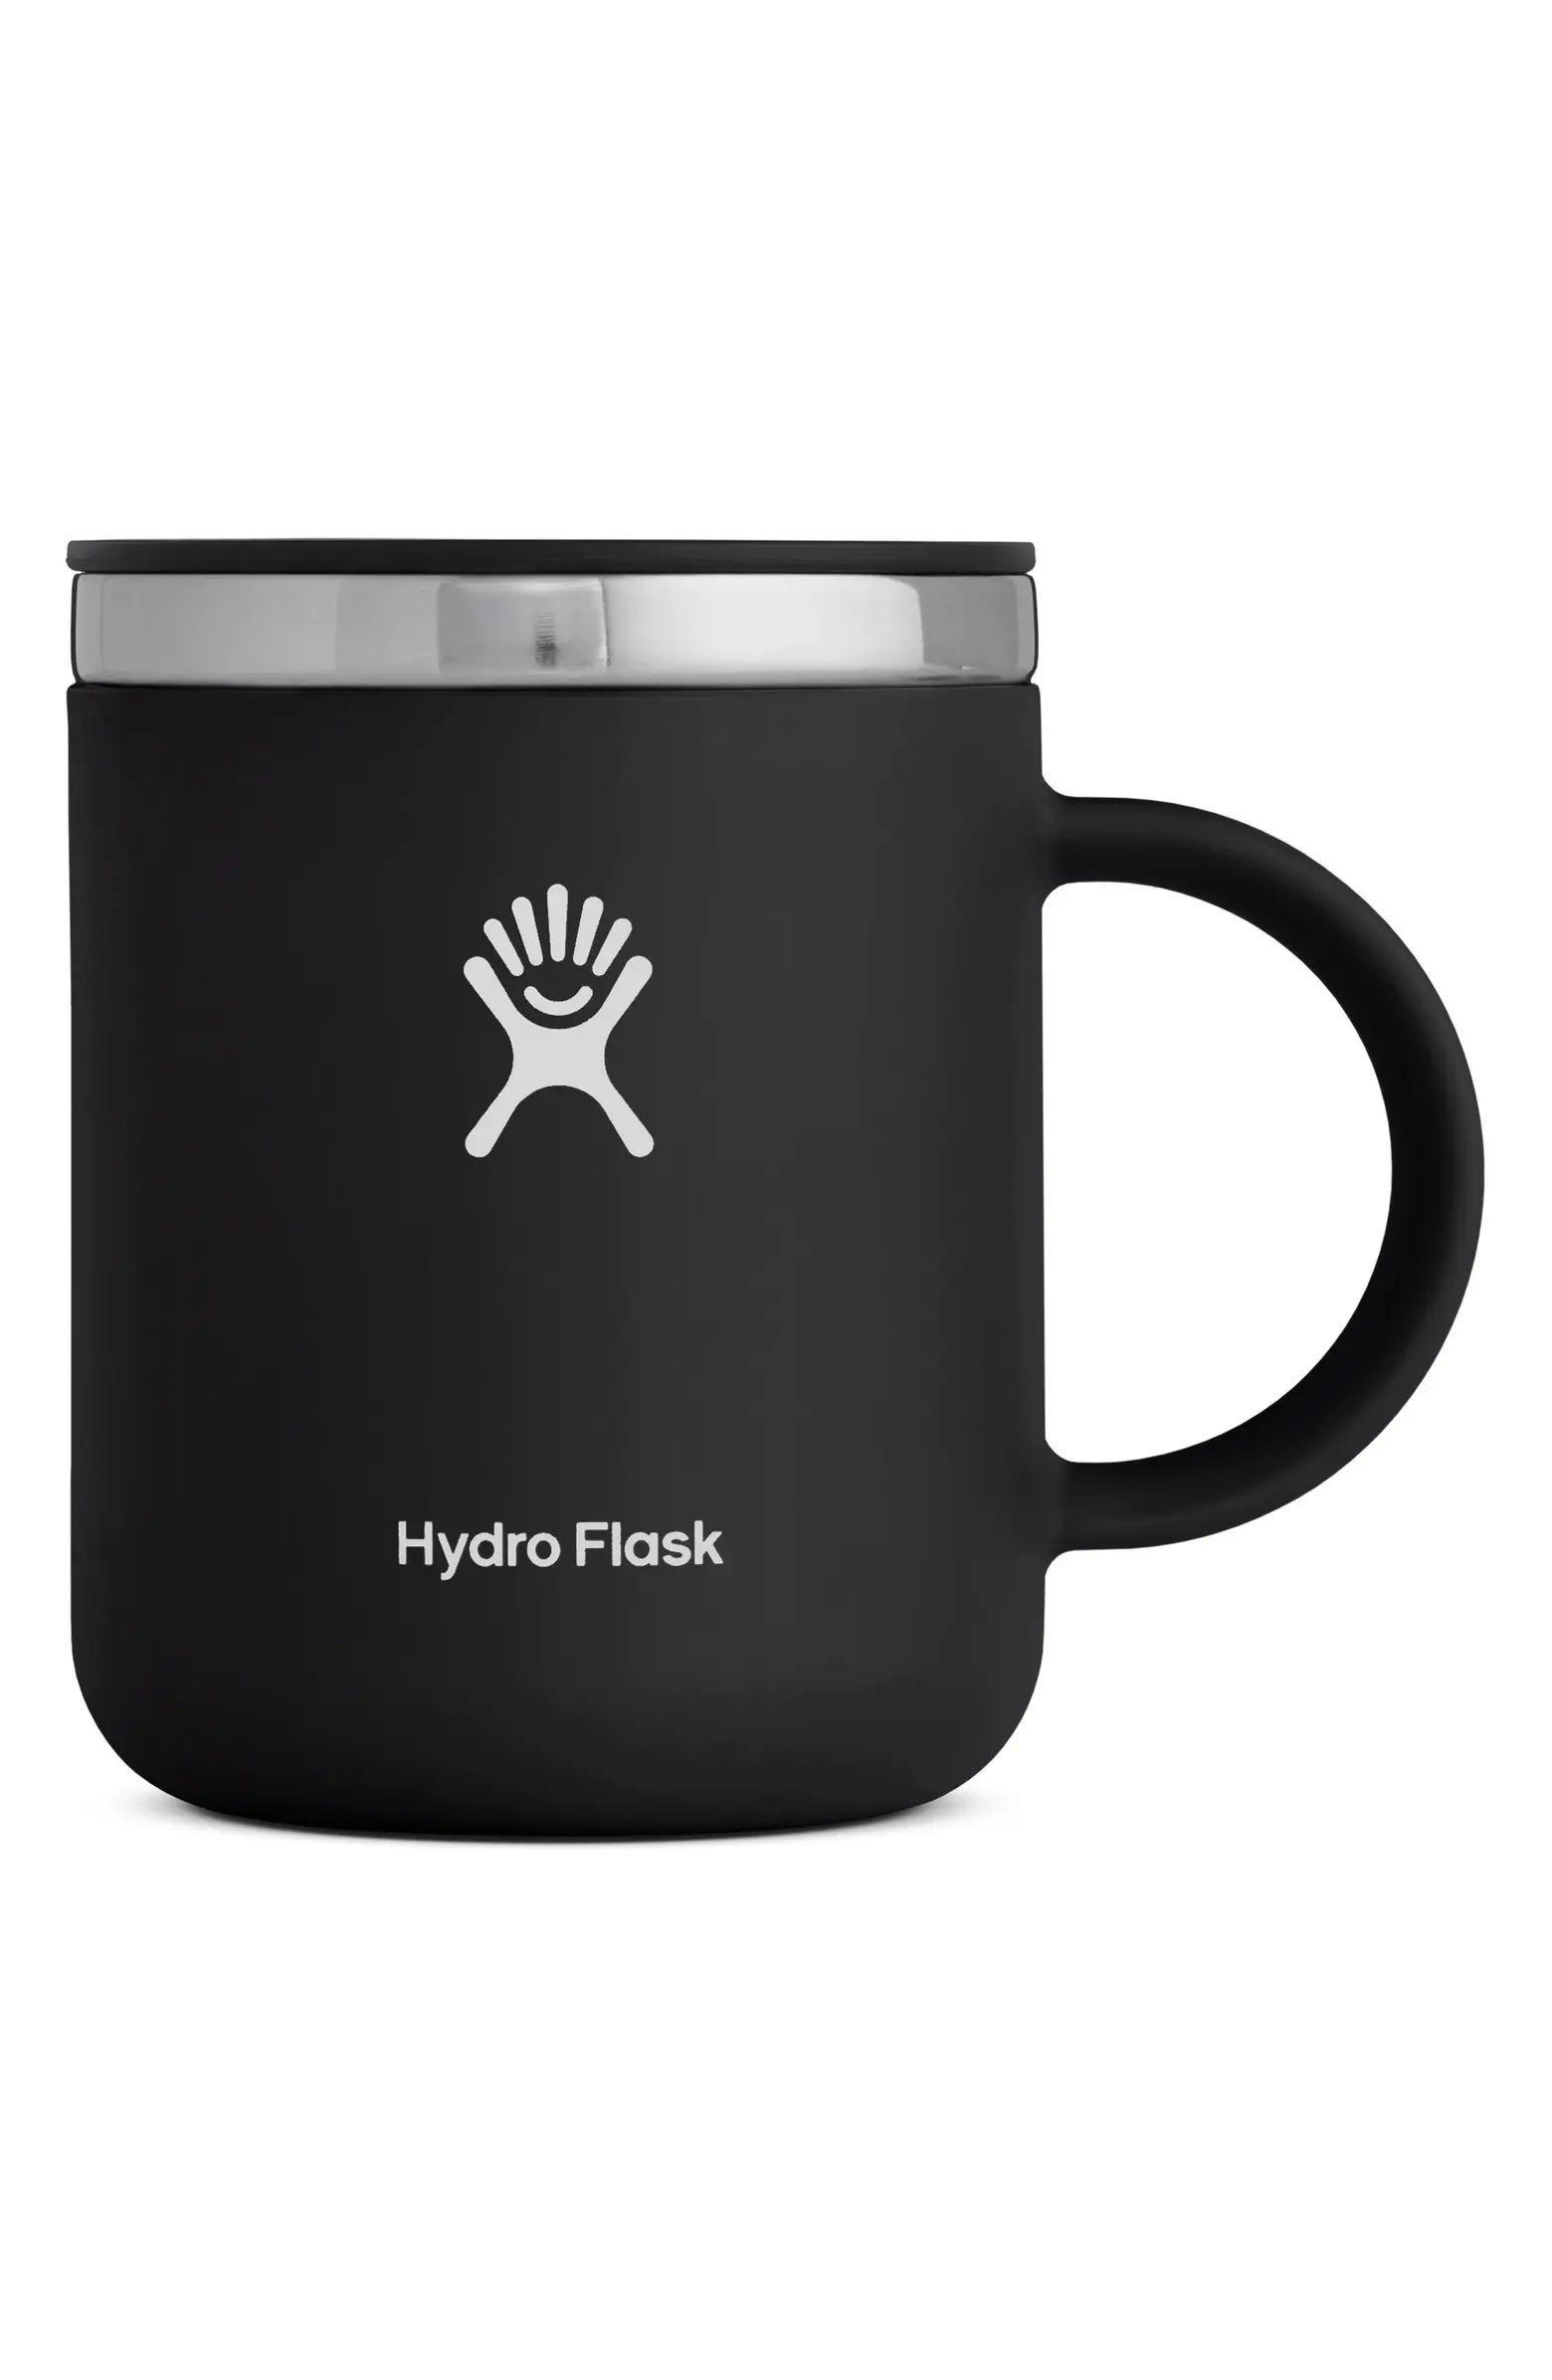 Hydro Flask 12-Ounce Coffee Mug | Nordstrom | Nordstrom